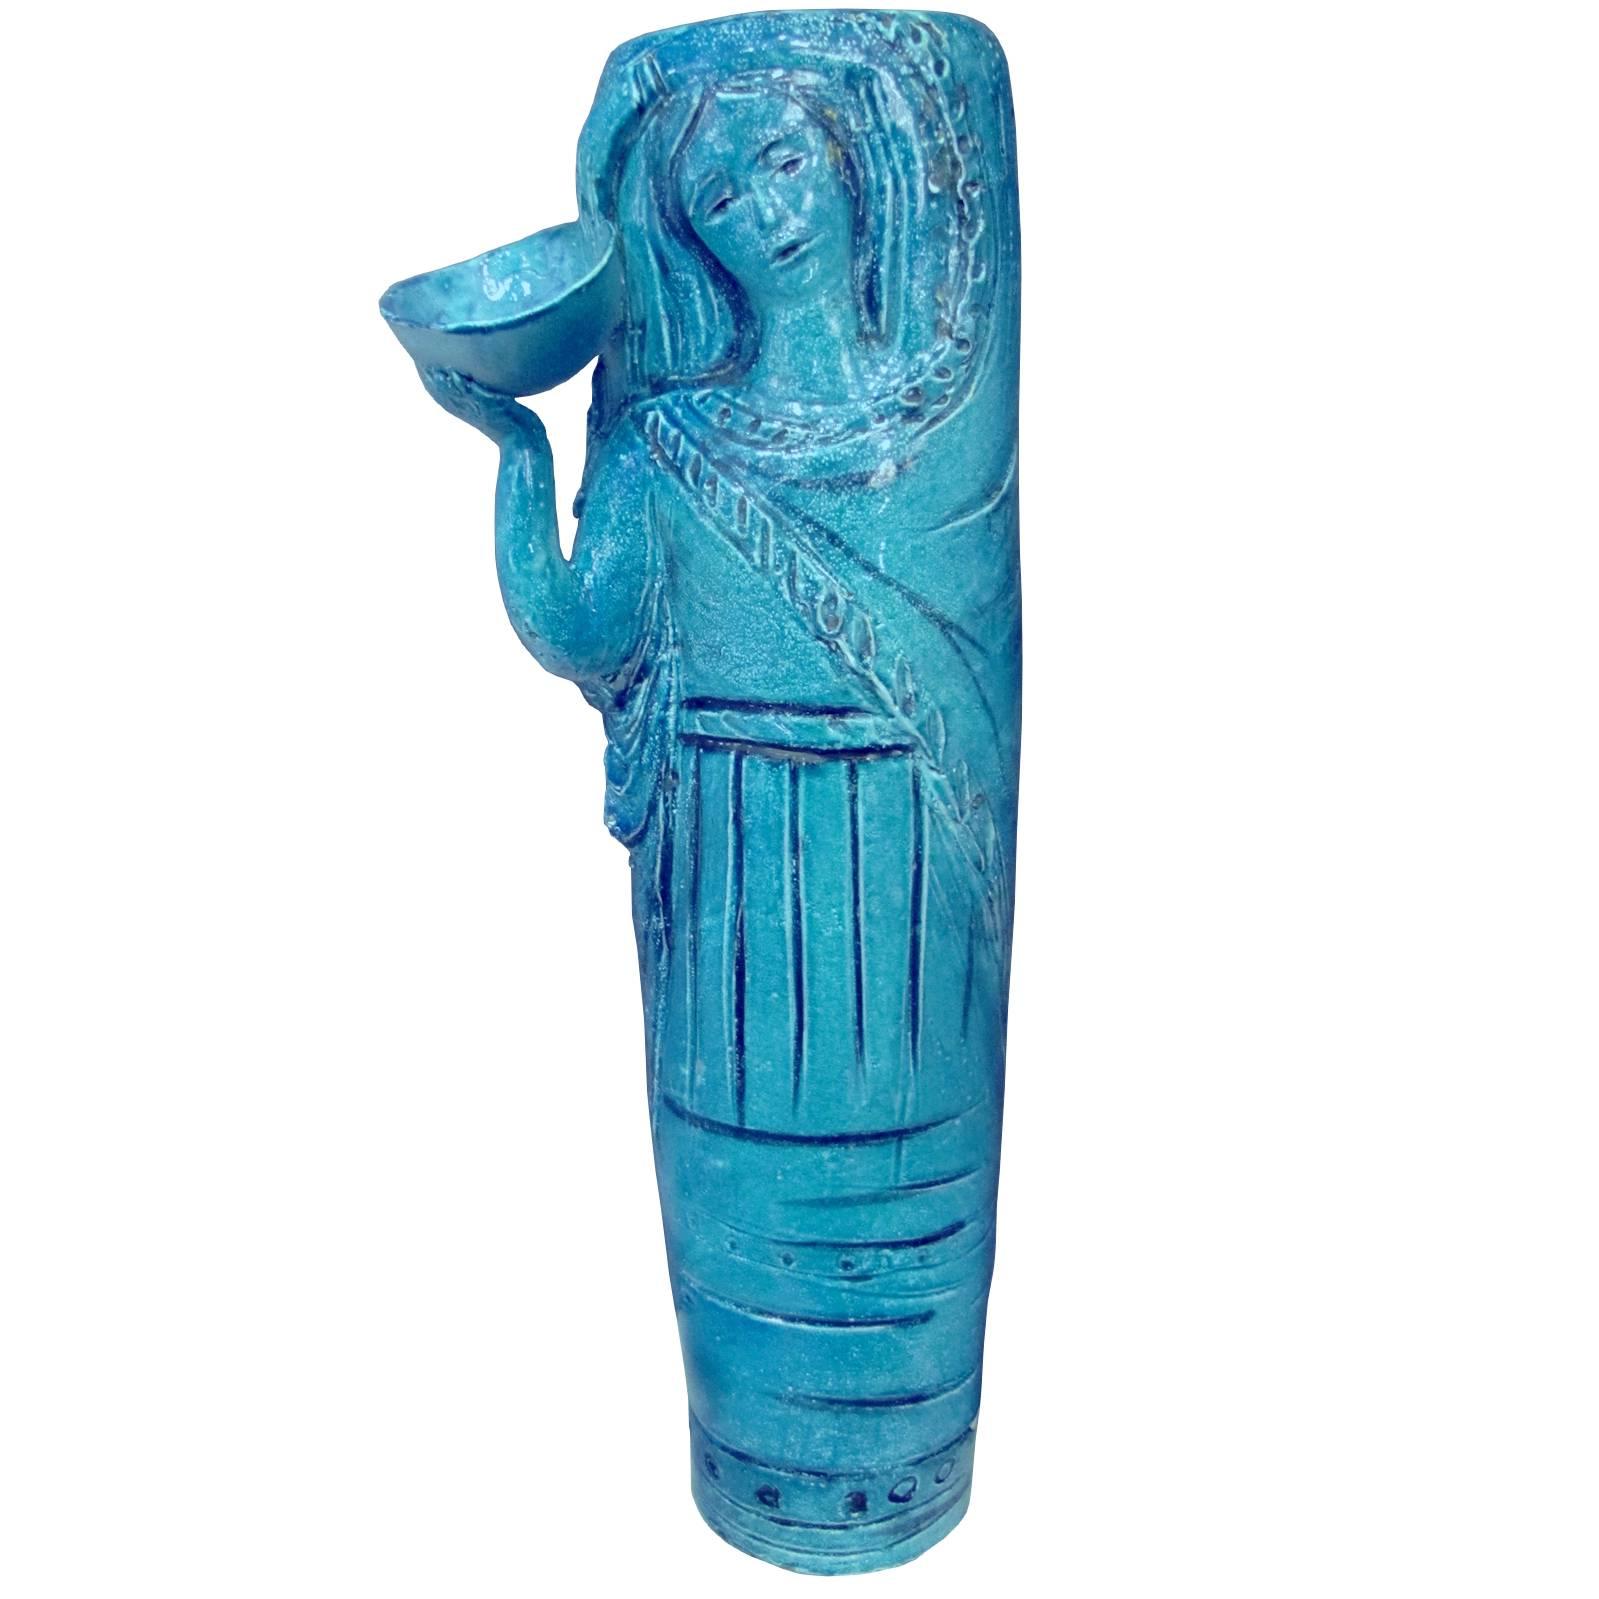 Vase-Sculpture in Blue Glazed Earthenware by Angelo Ungania, circa 1940 For Sale